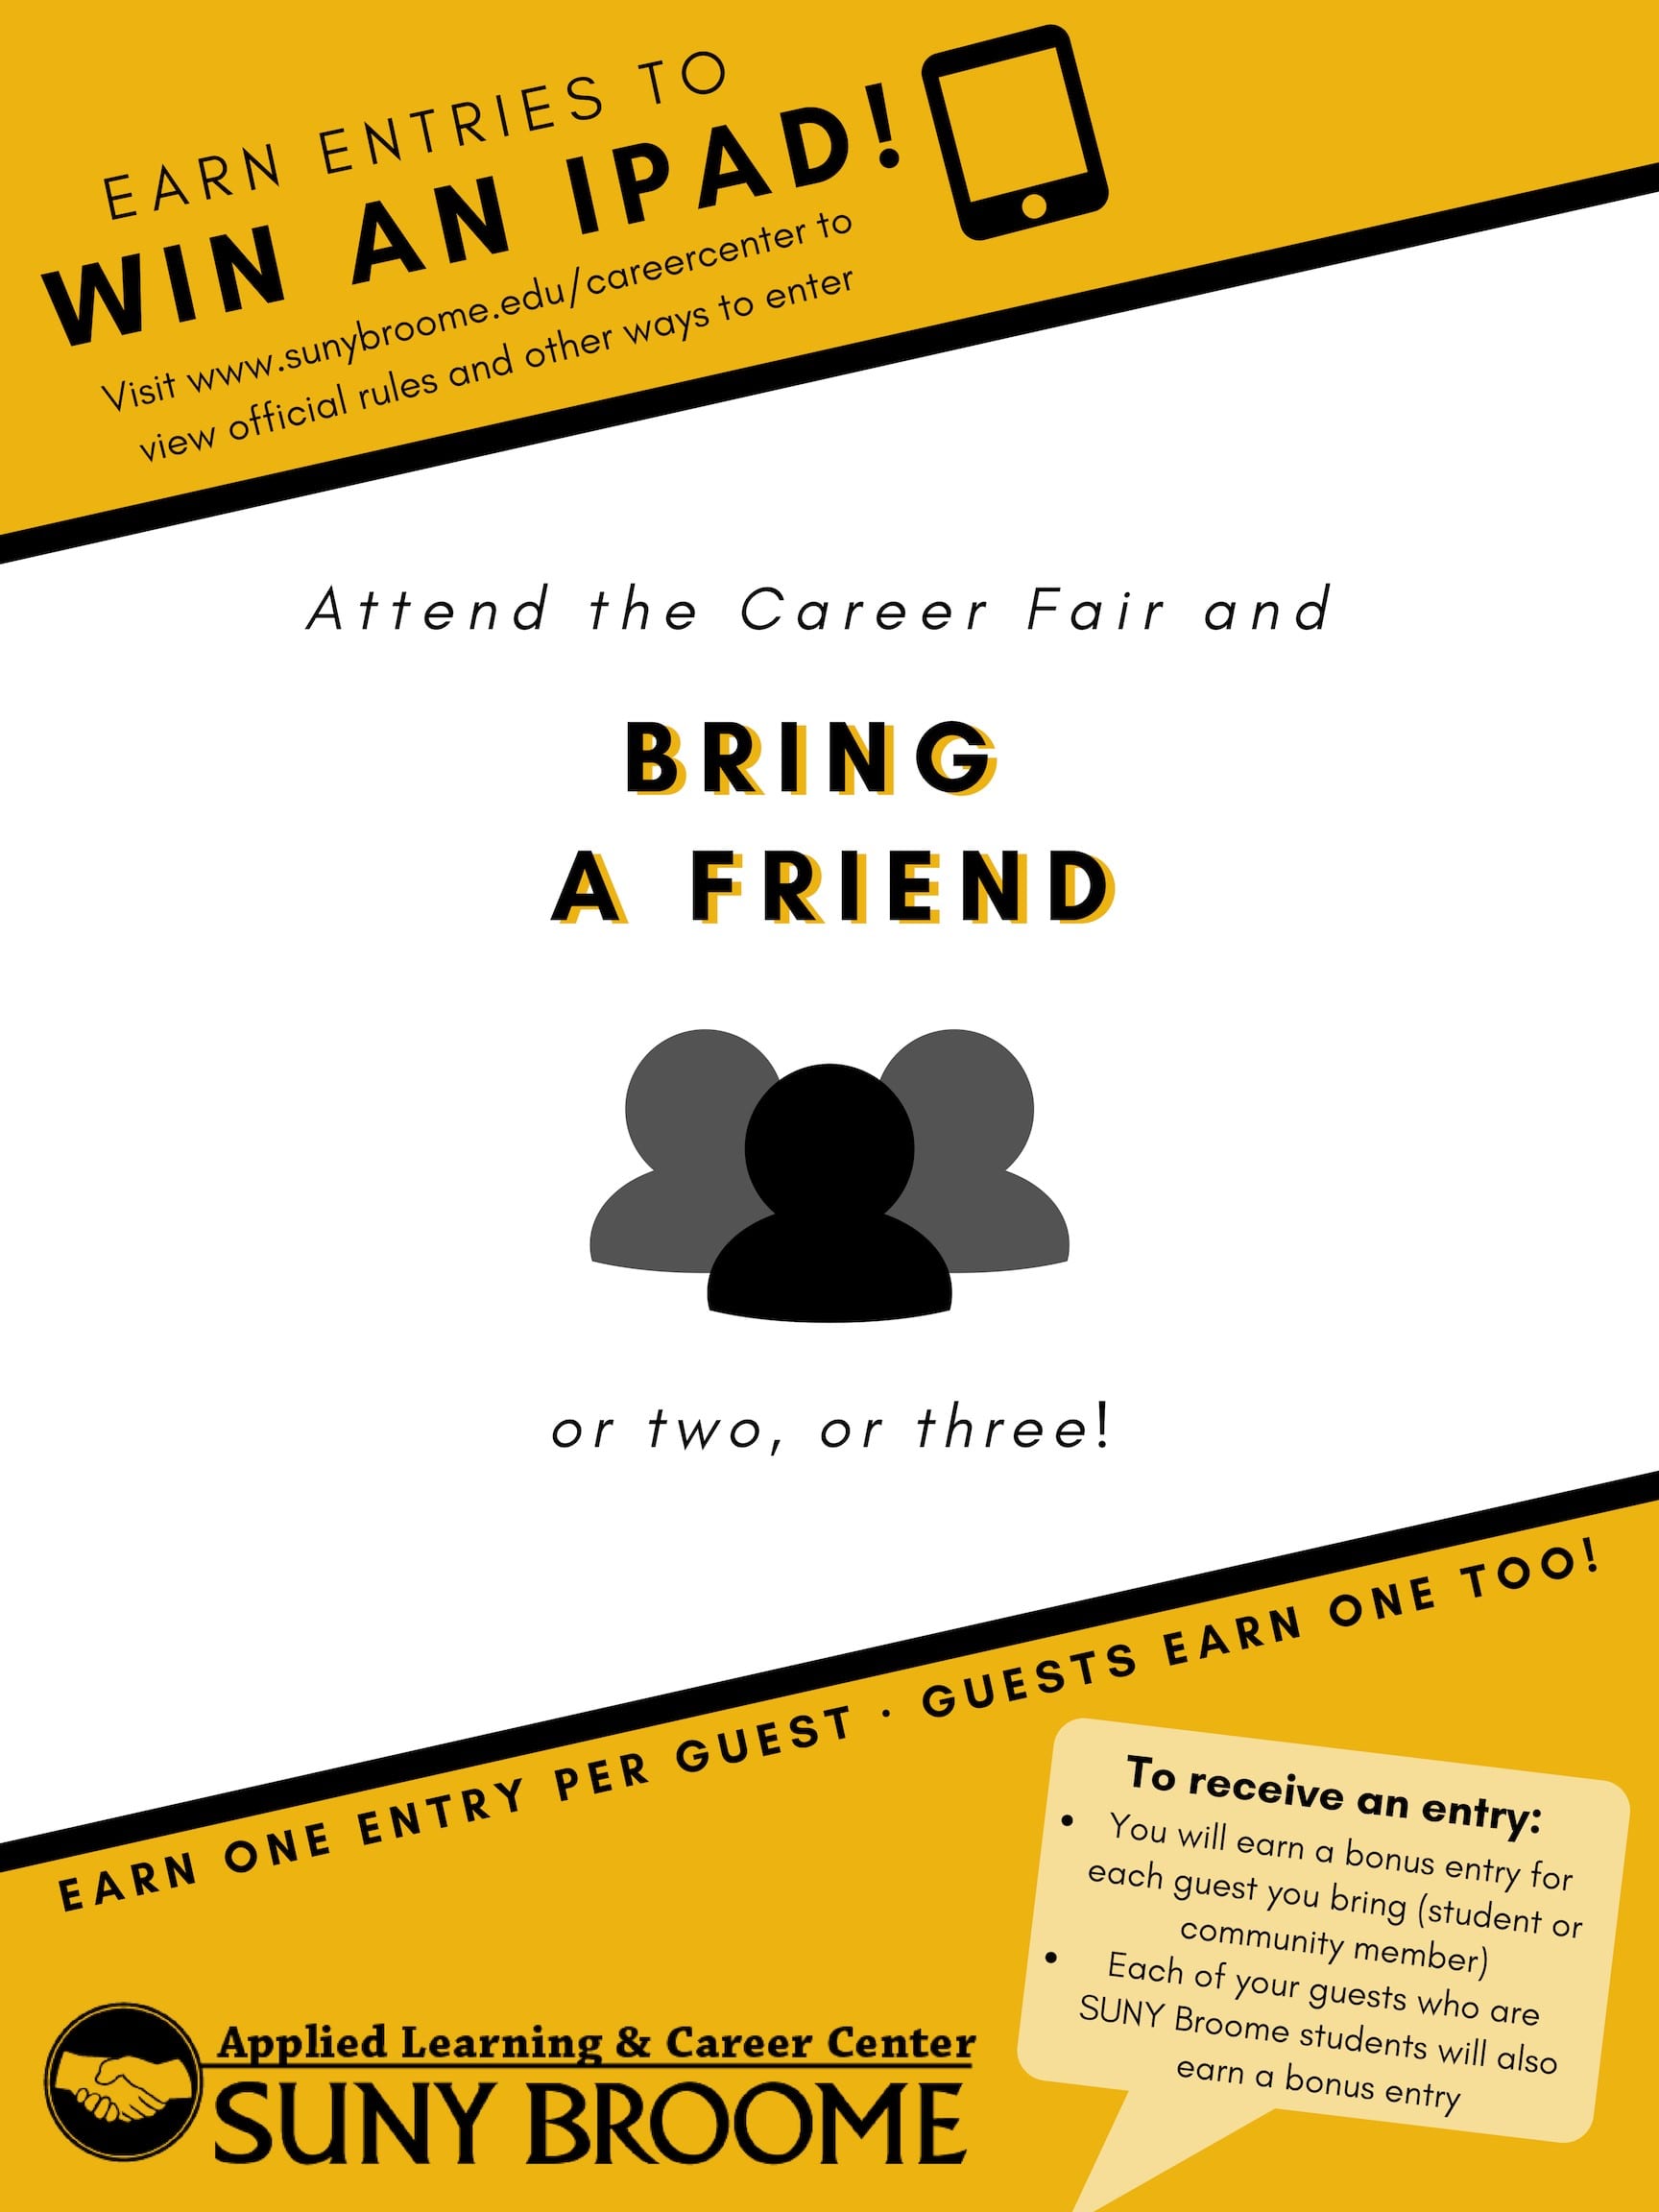 Bring a friend and you can both earn entries to win an iPad!